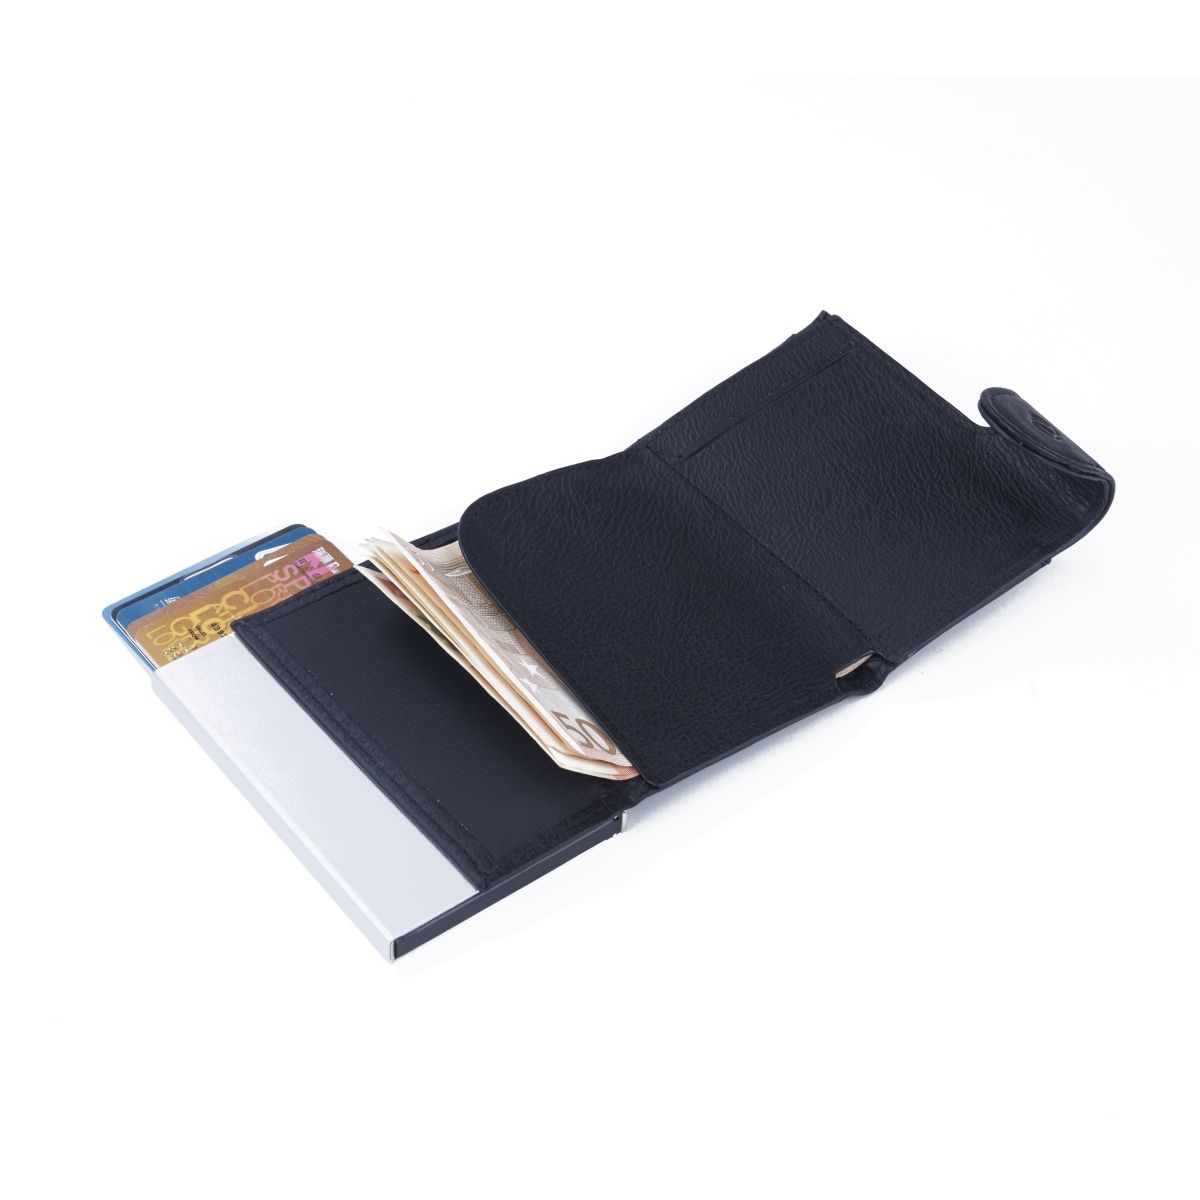 C-Secure Aluminum Card Holder with Genuine Leather - Black